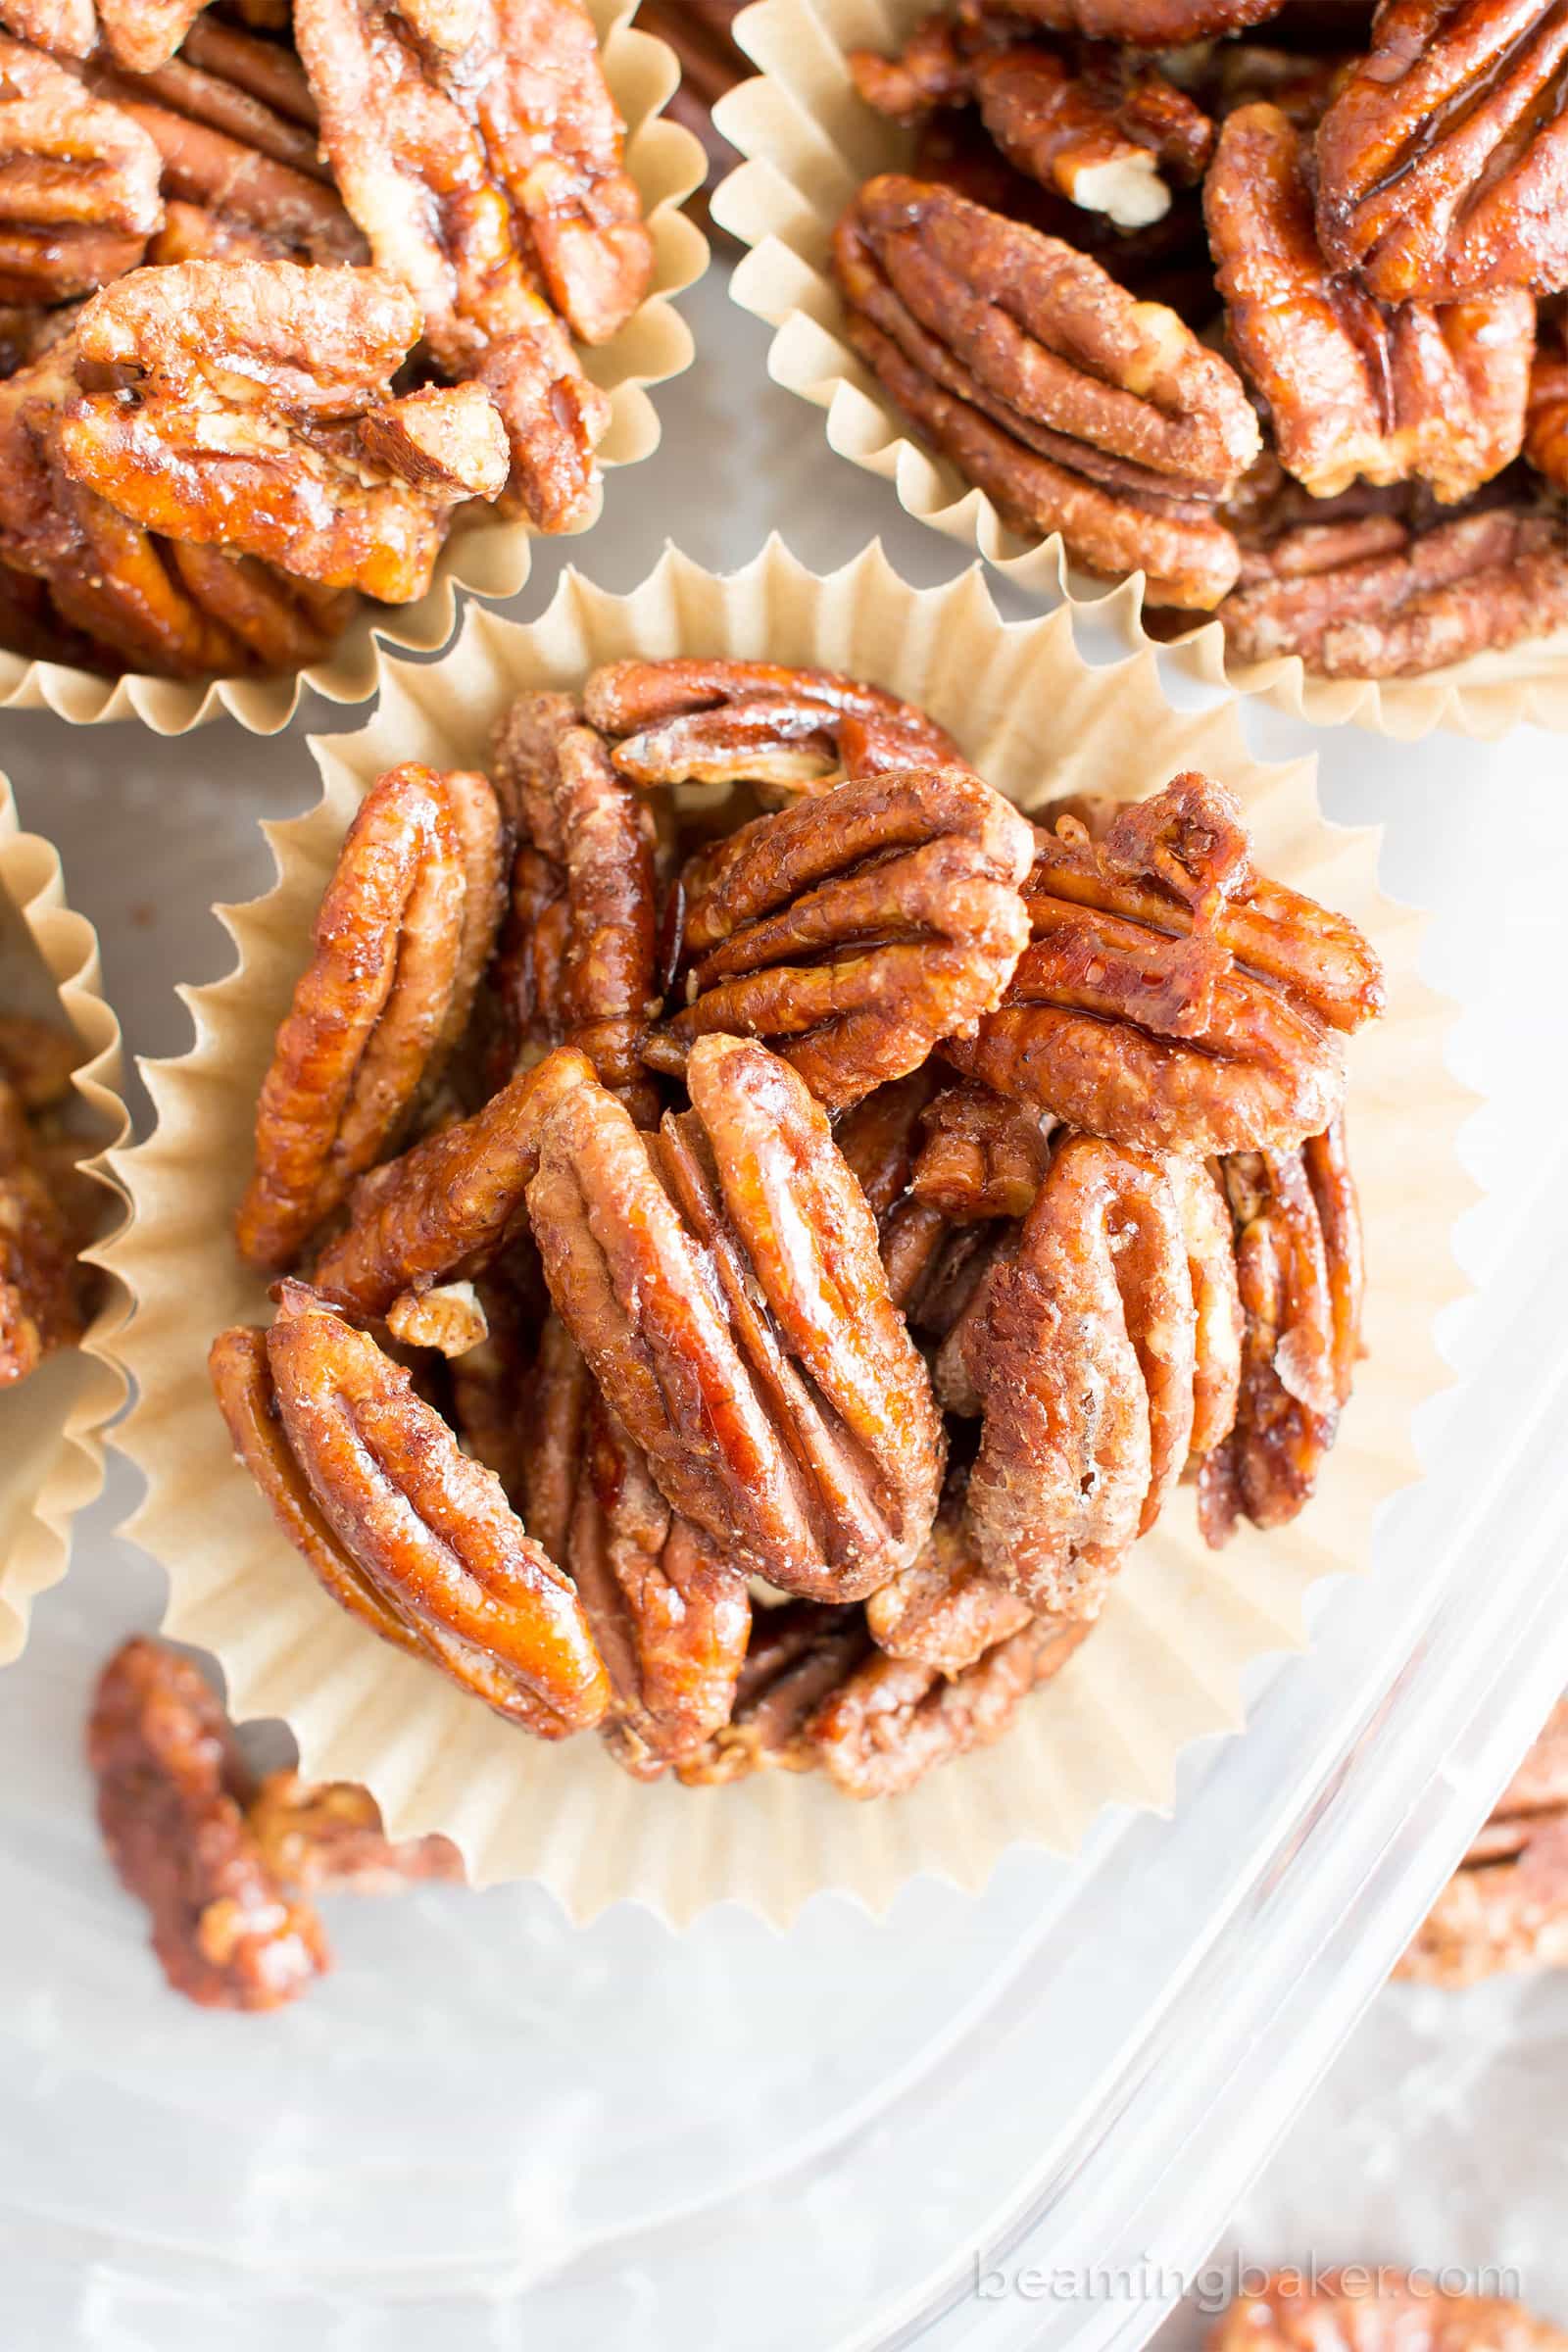 Vegan Candied Pecans: learn how to make candied pecans with just 4 healthy ingredients! Prep time is just 5 mins for deliciously glazed candied pecans in this lower sugar recipe! #Pecans #Healthy #Vegan #Fall | Recipe at BeamingBaker.com